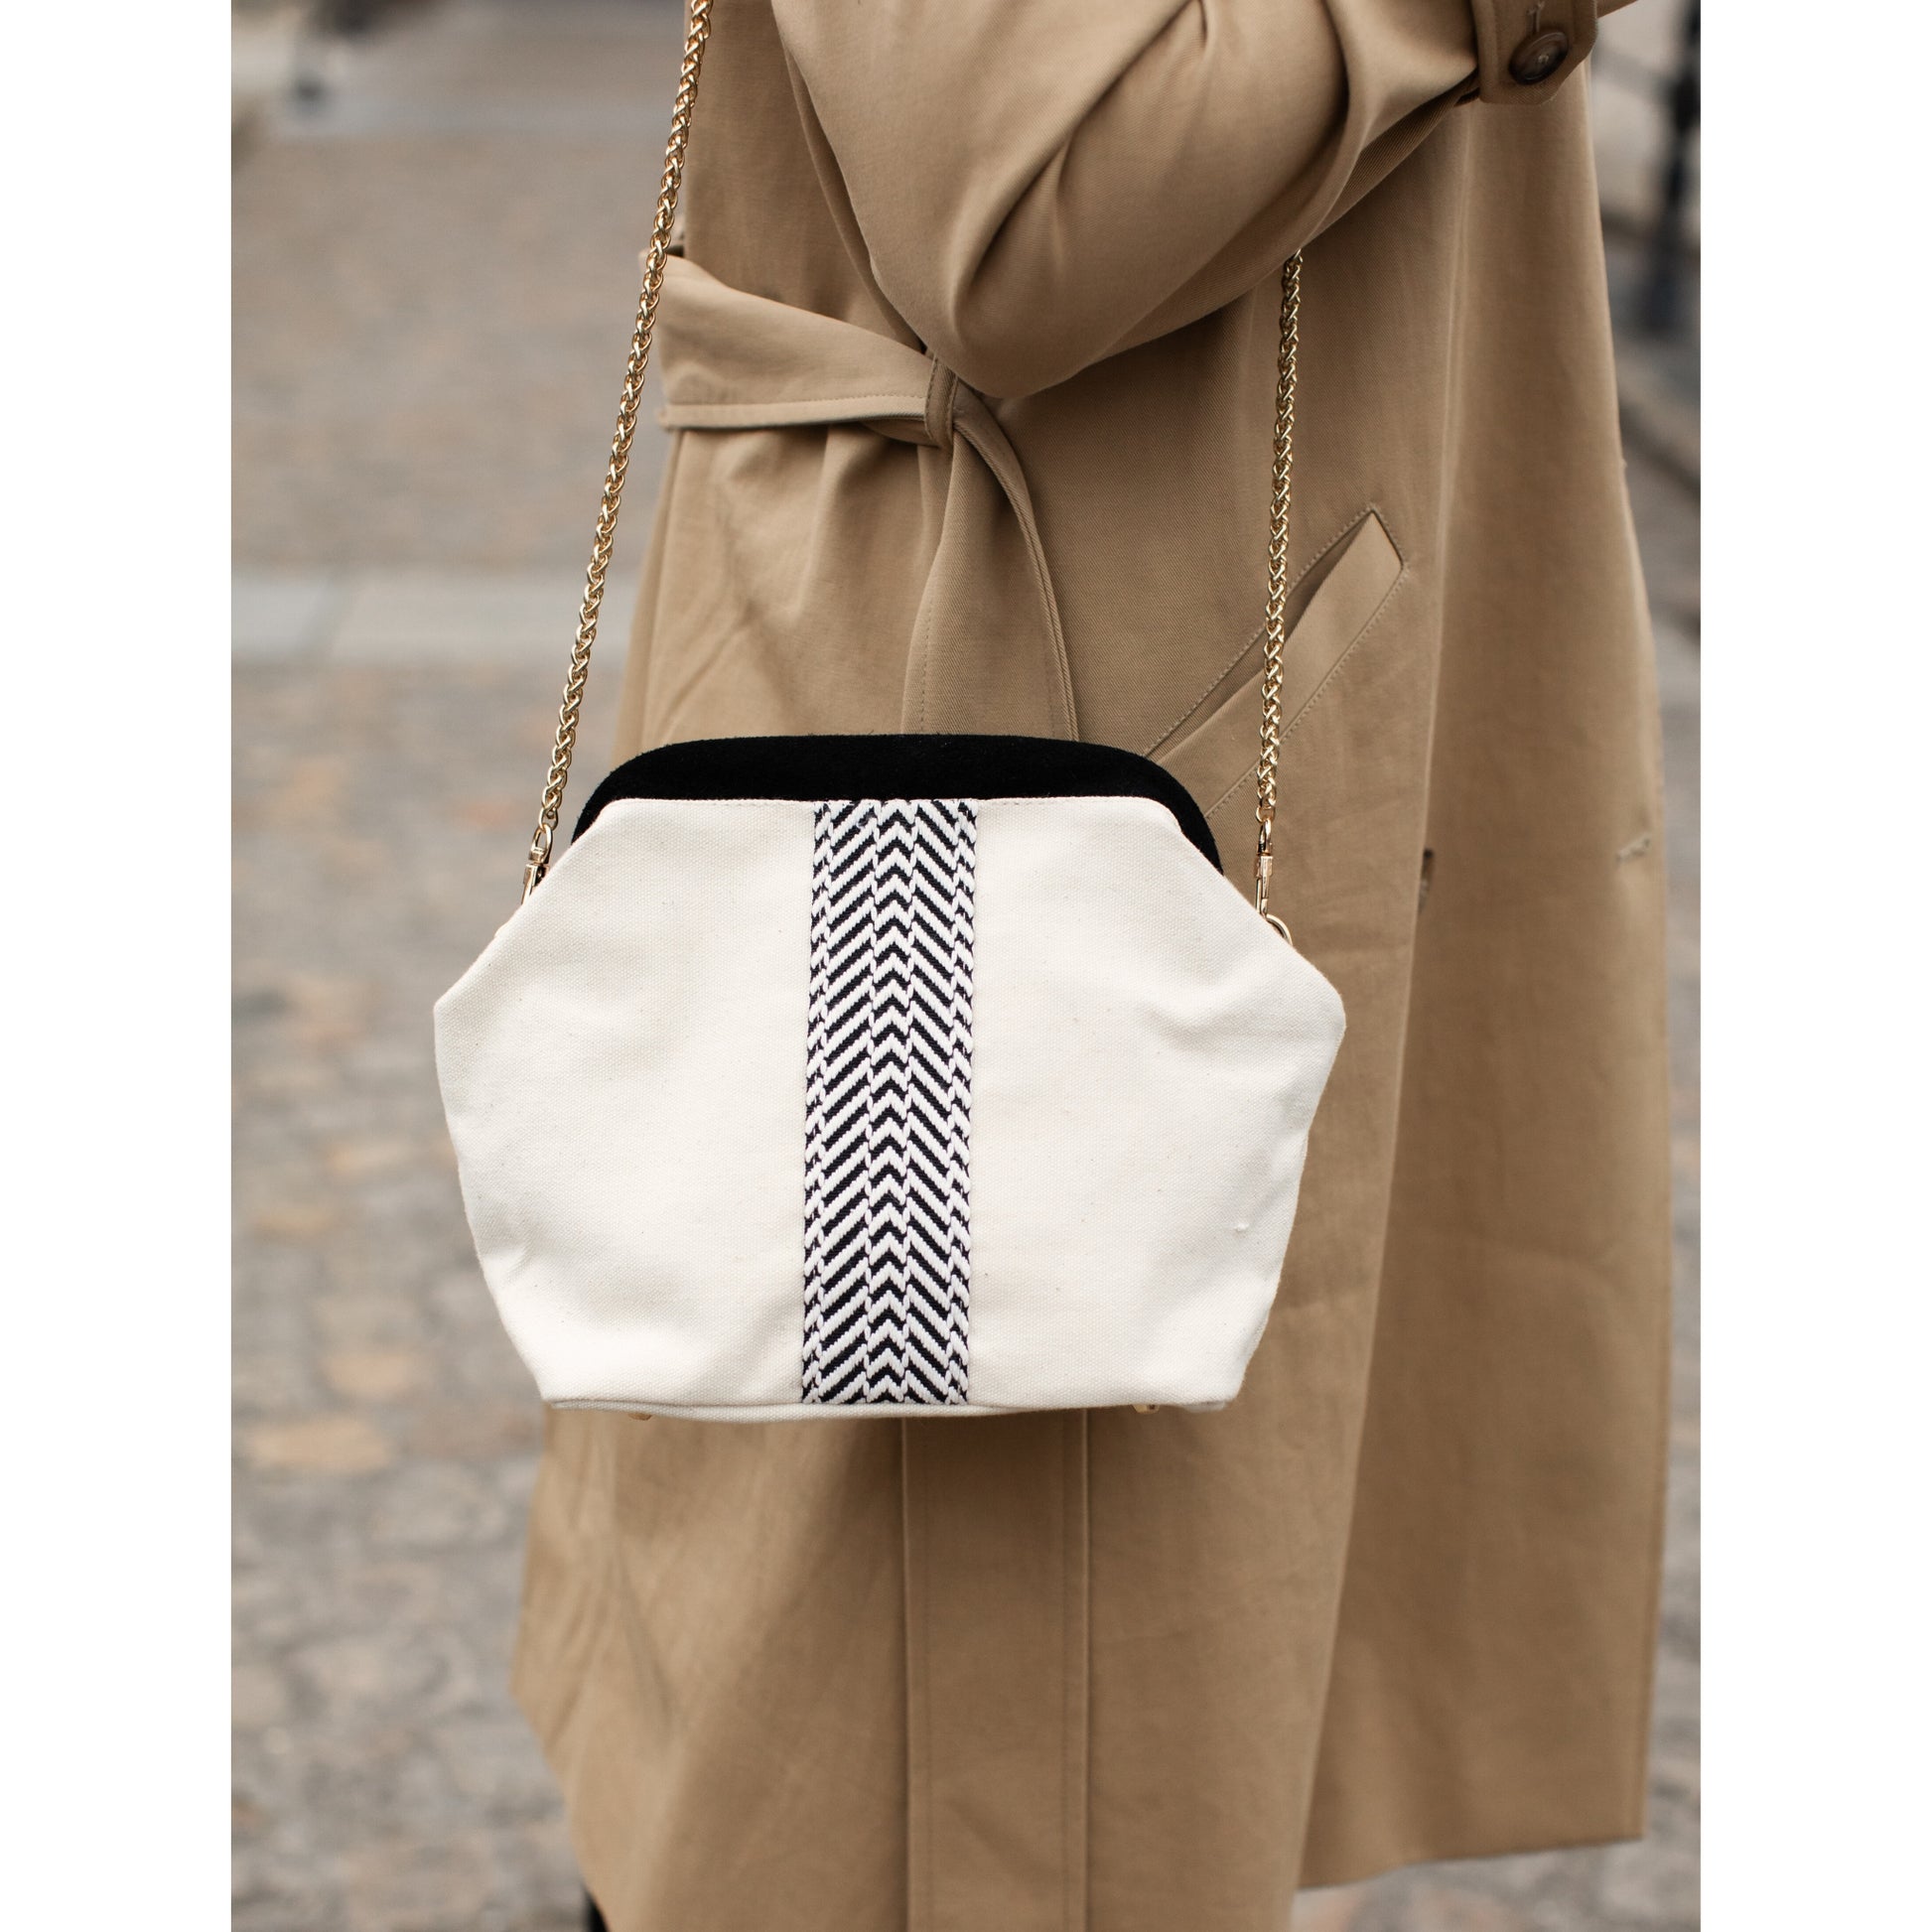 sac bandouliere blanc toile luxe femme